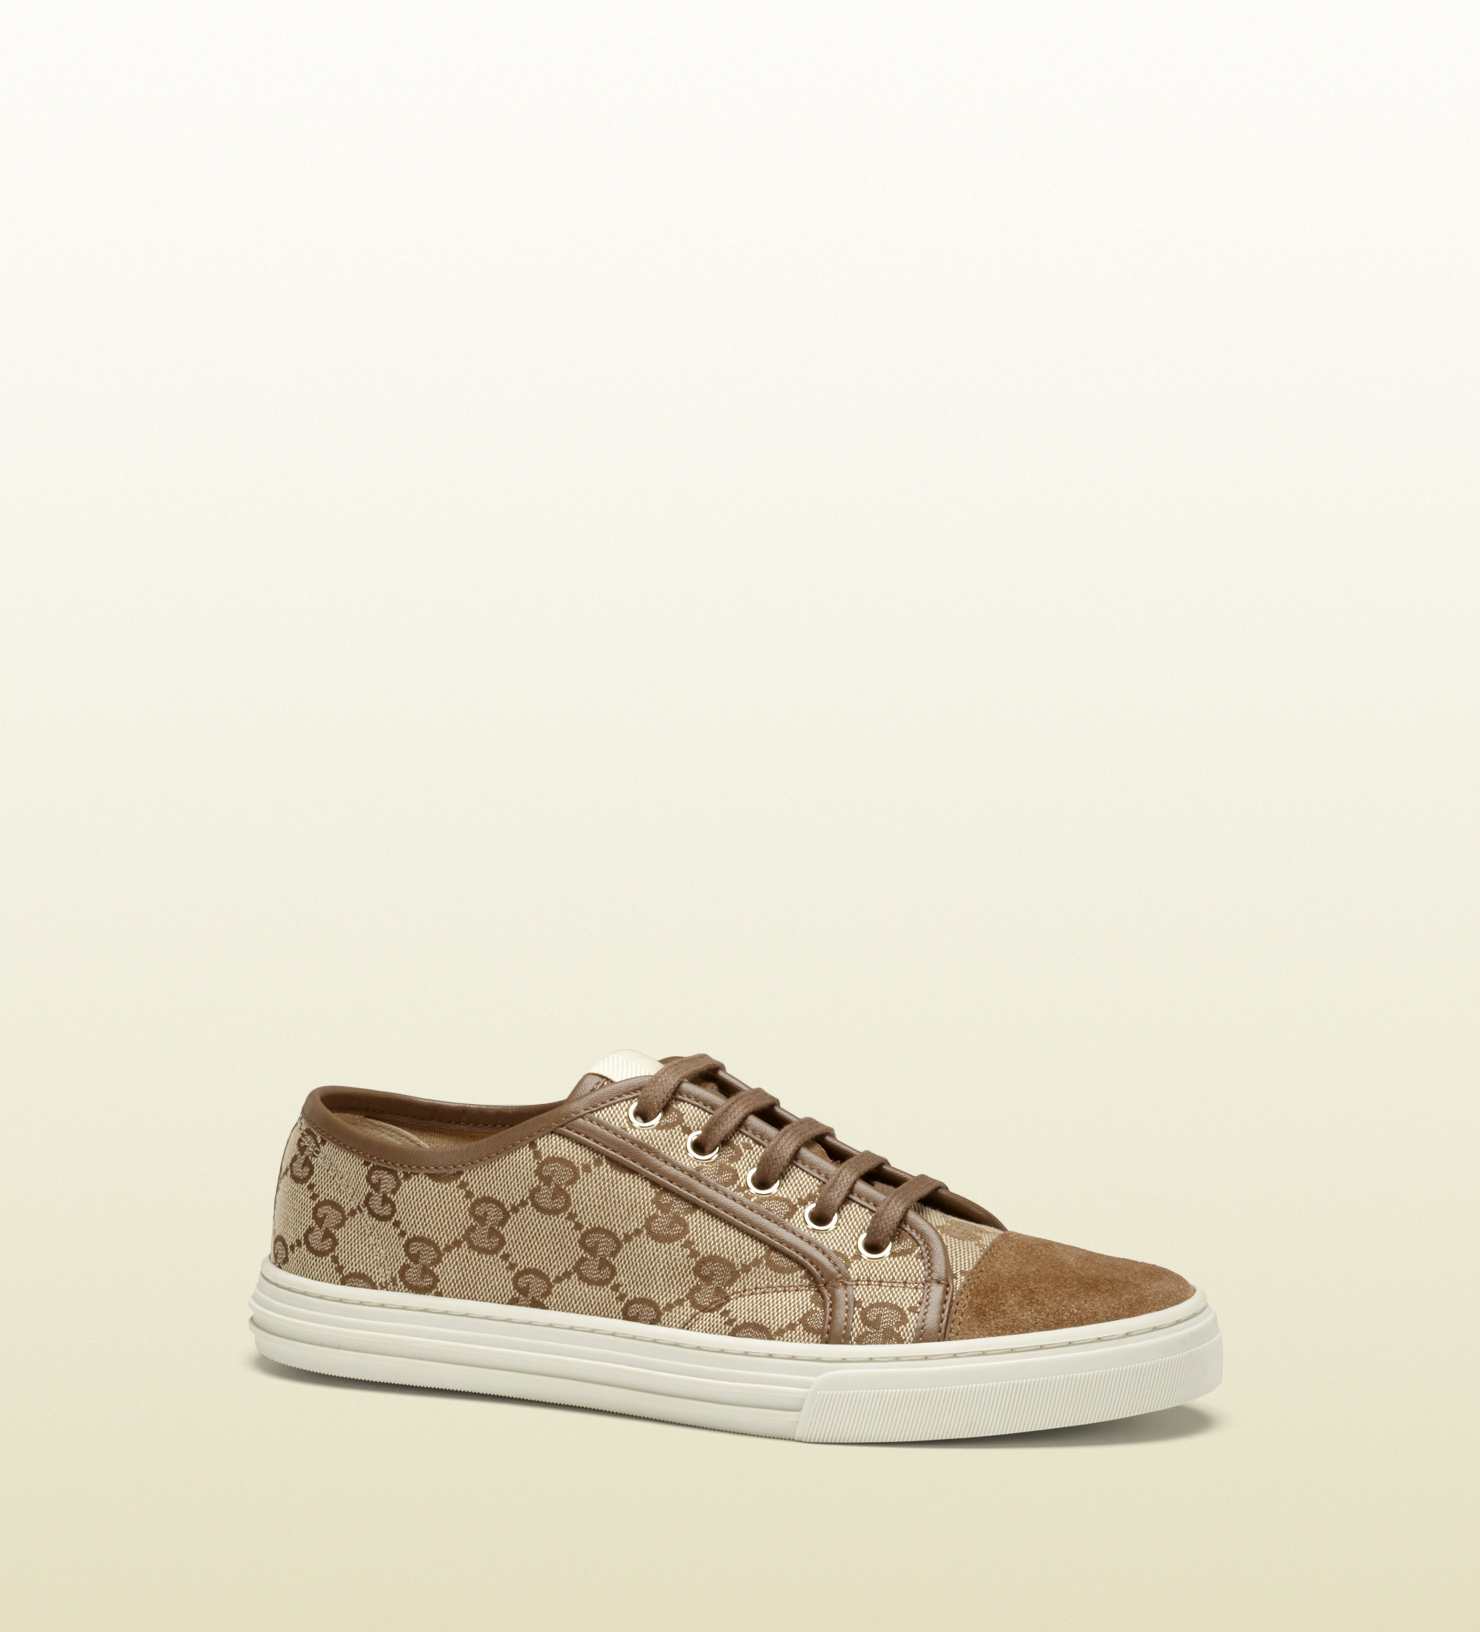 Gucci Canvas Sneakers in Beige (Brown 